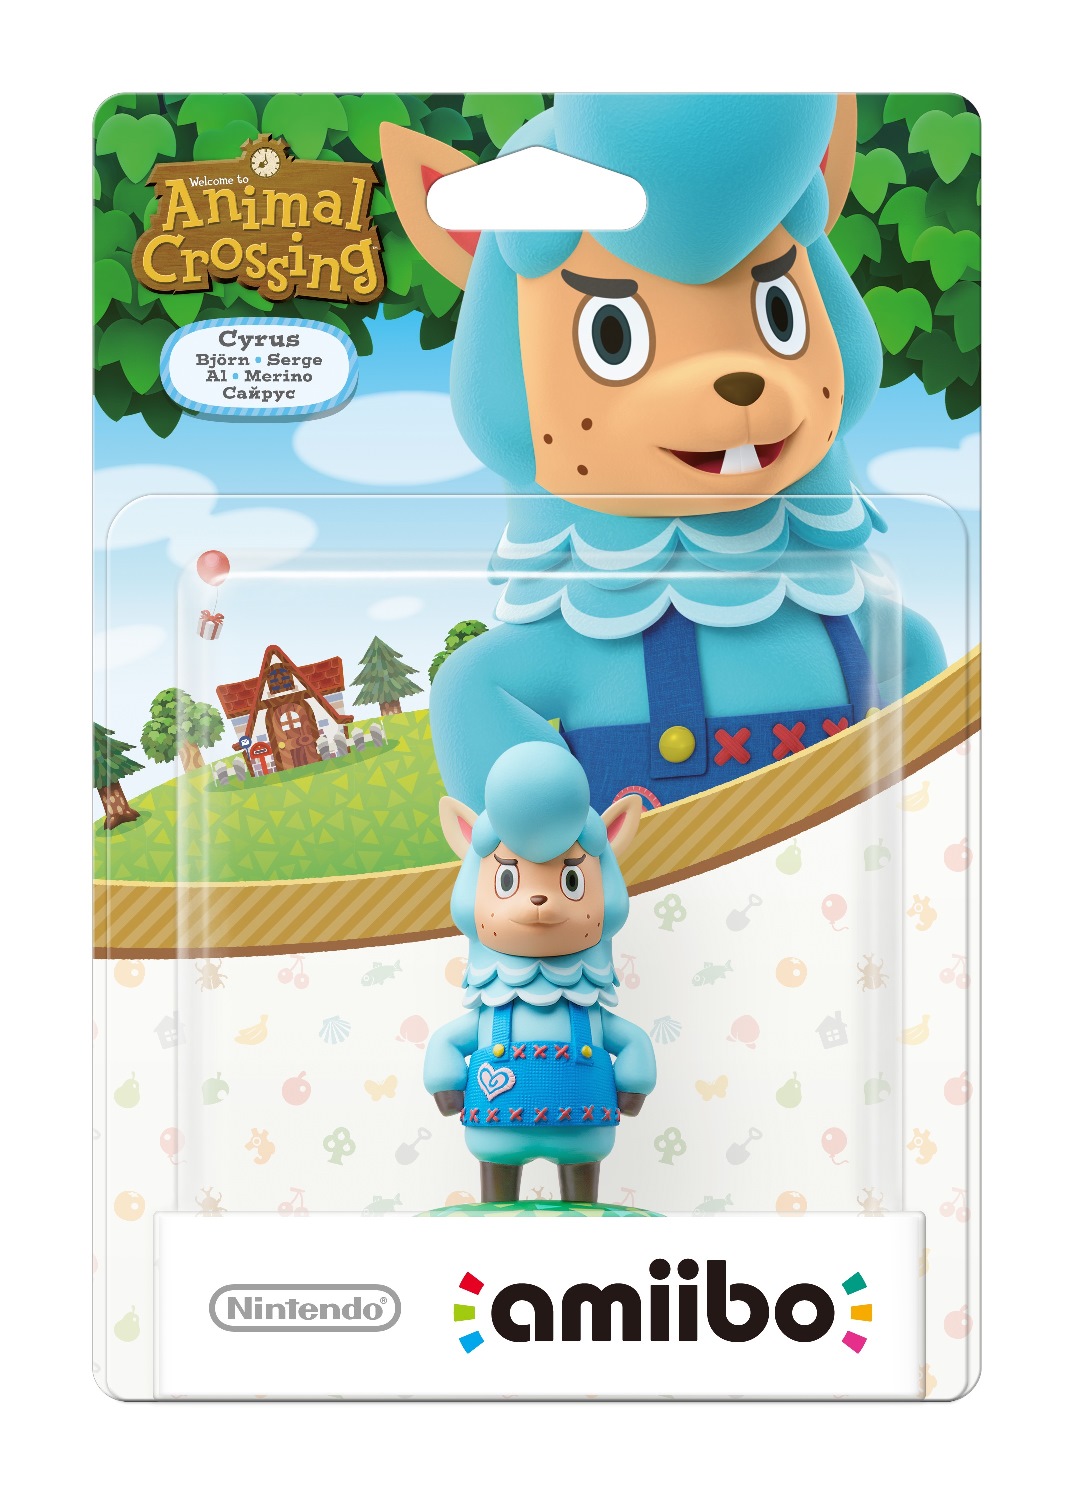 Packaging for the Animal Crossing amiibo figures 